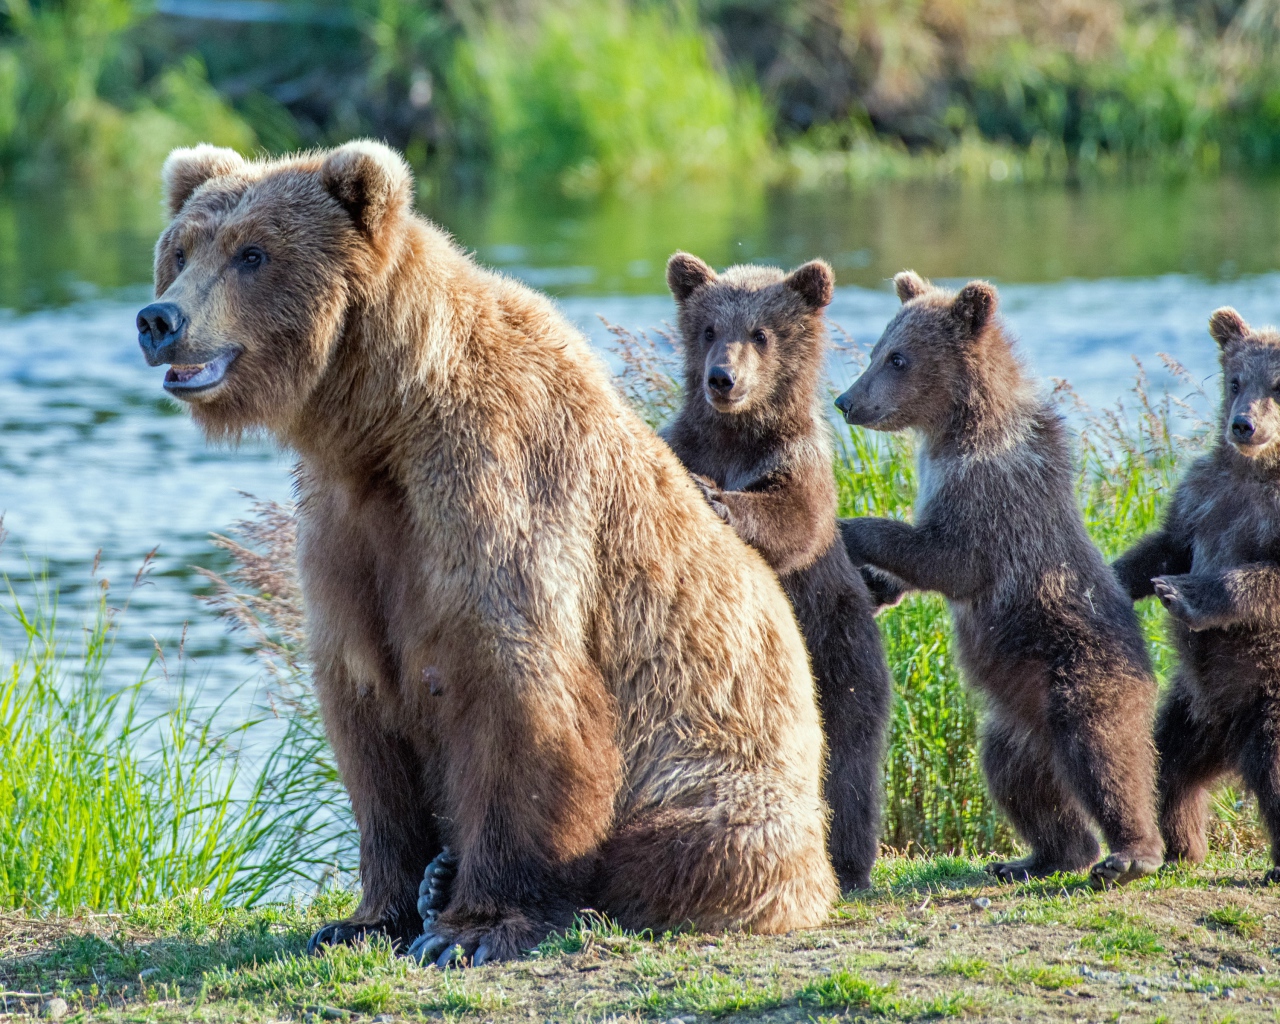 Big brown bear with cubs by the river